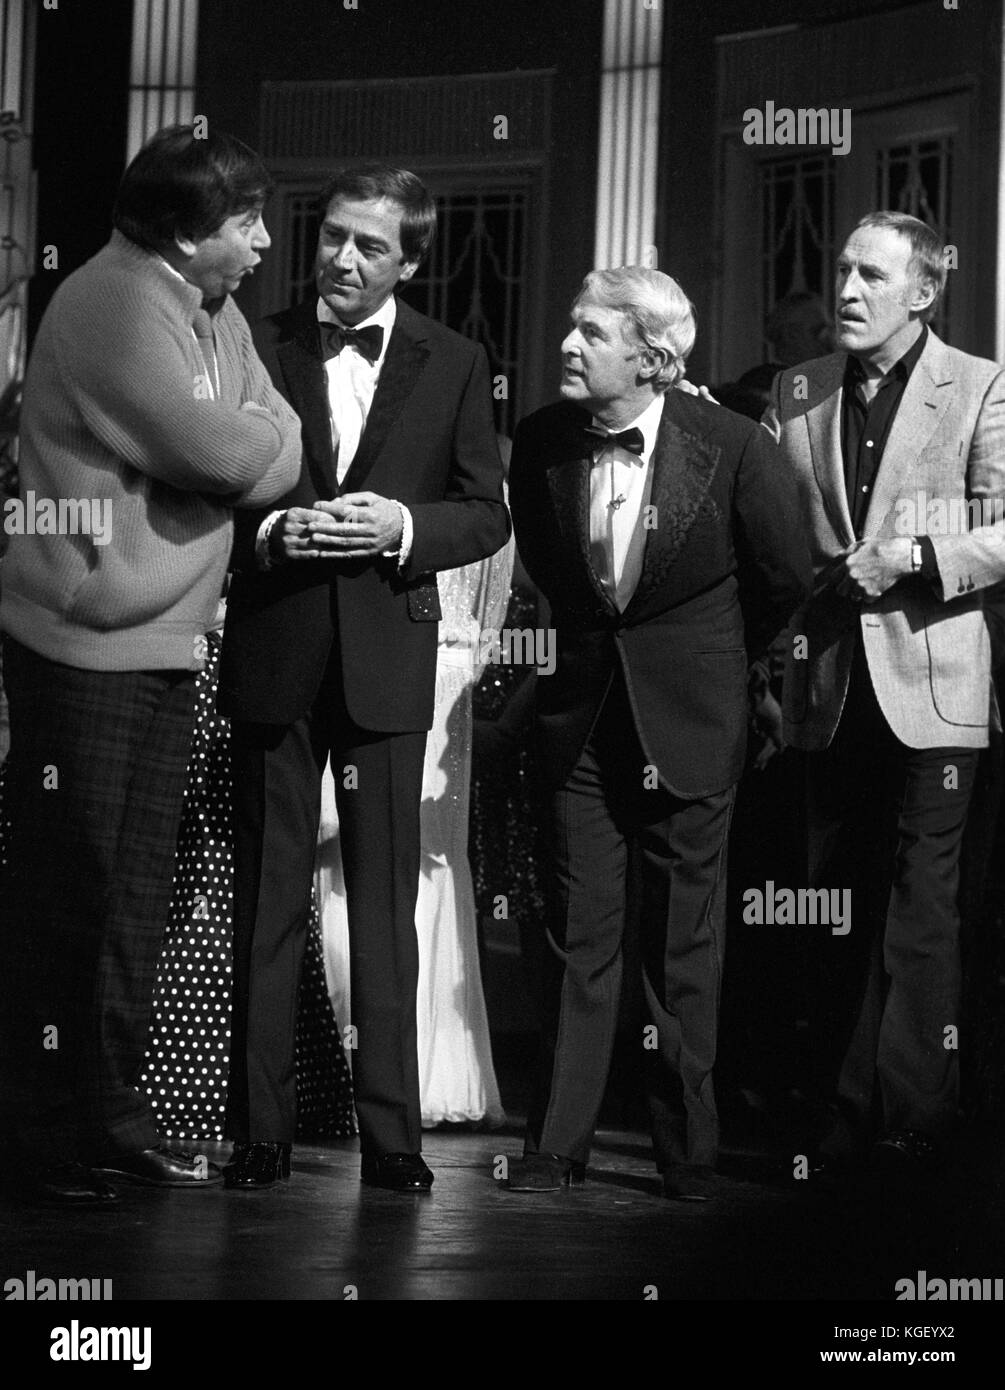 (l-r) Comedians Jimmy Tarbuck, Des O'Connor, Ernie Wise and Bruce Forsyth at the London Palladium when they paid tribute in a show to Ernie's partner, Eric morecambe, who died earlier this year. Stock Photo